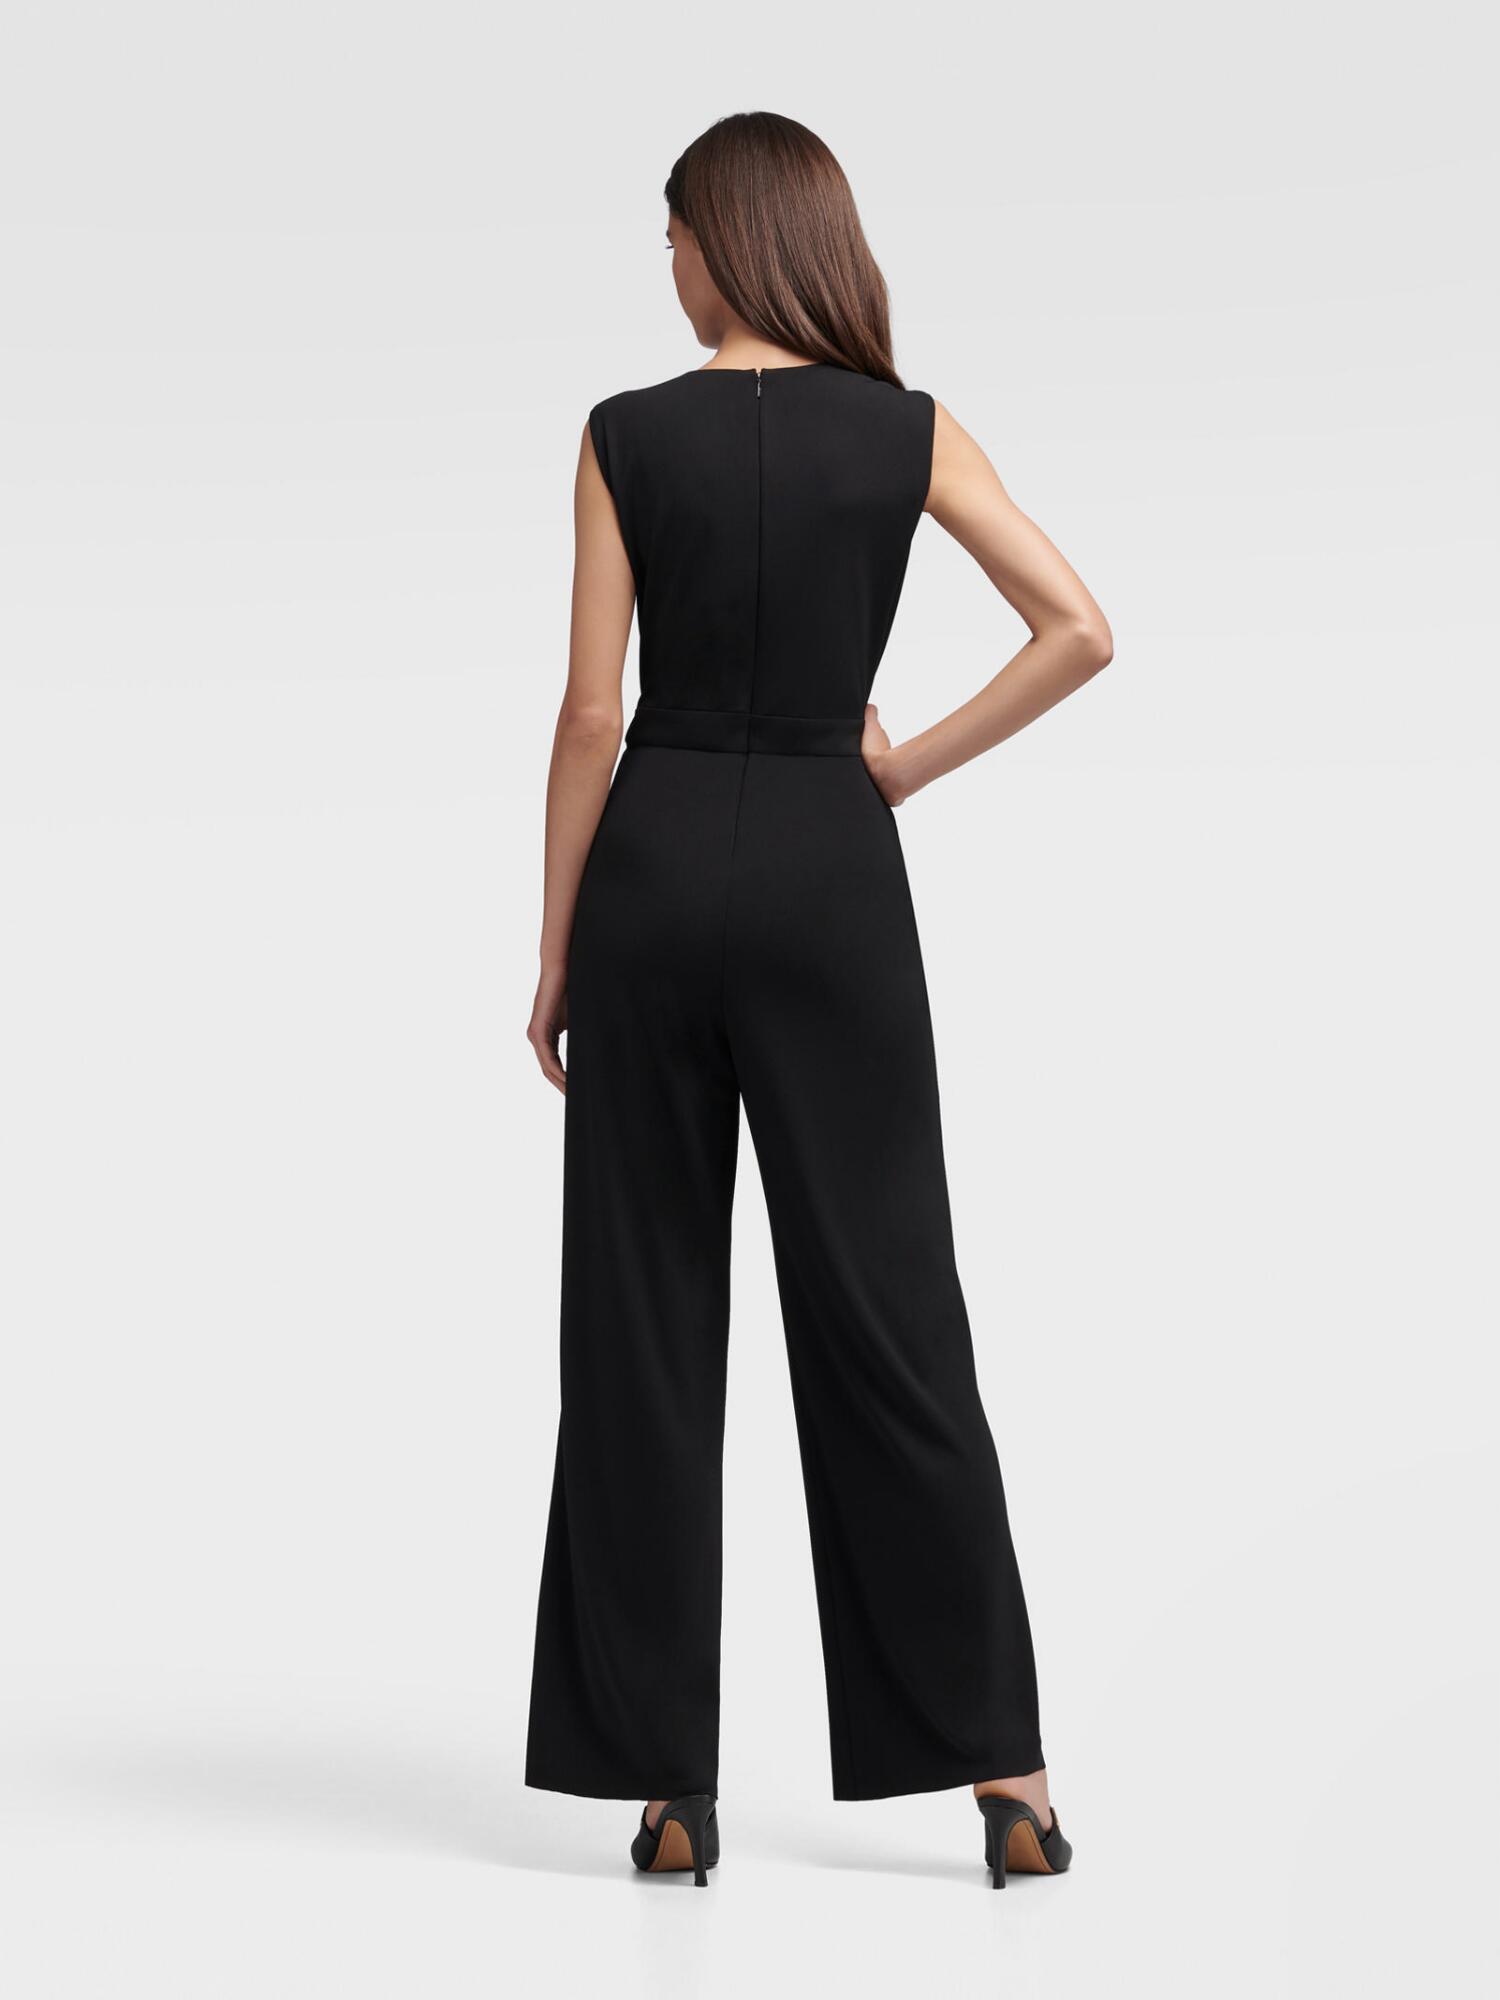 DKNY Synthetic Sleeveless Sailor Jumpsuit in Black - Lyst